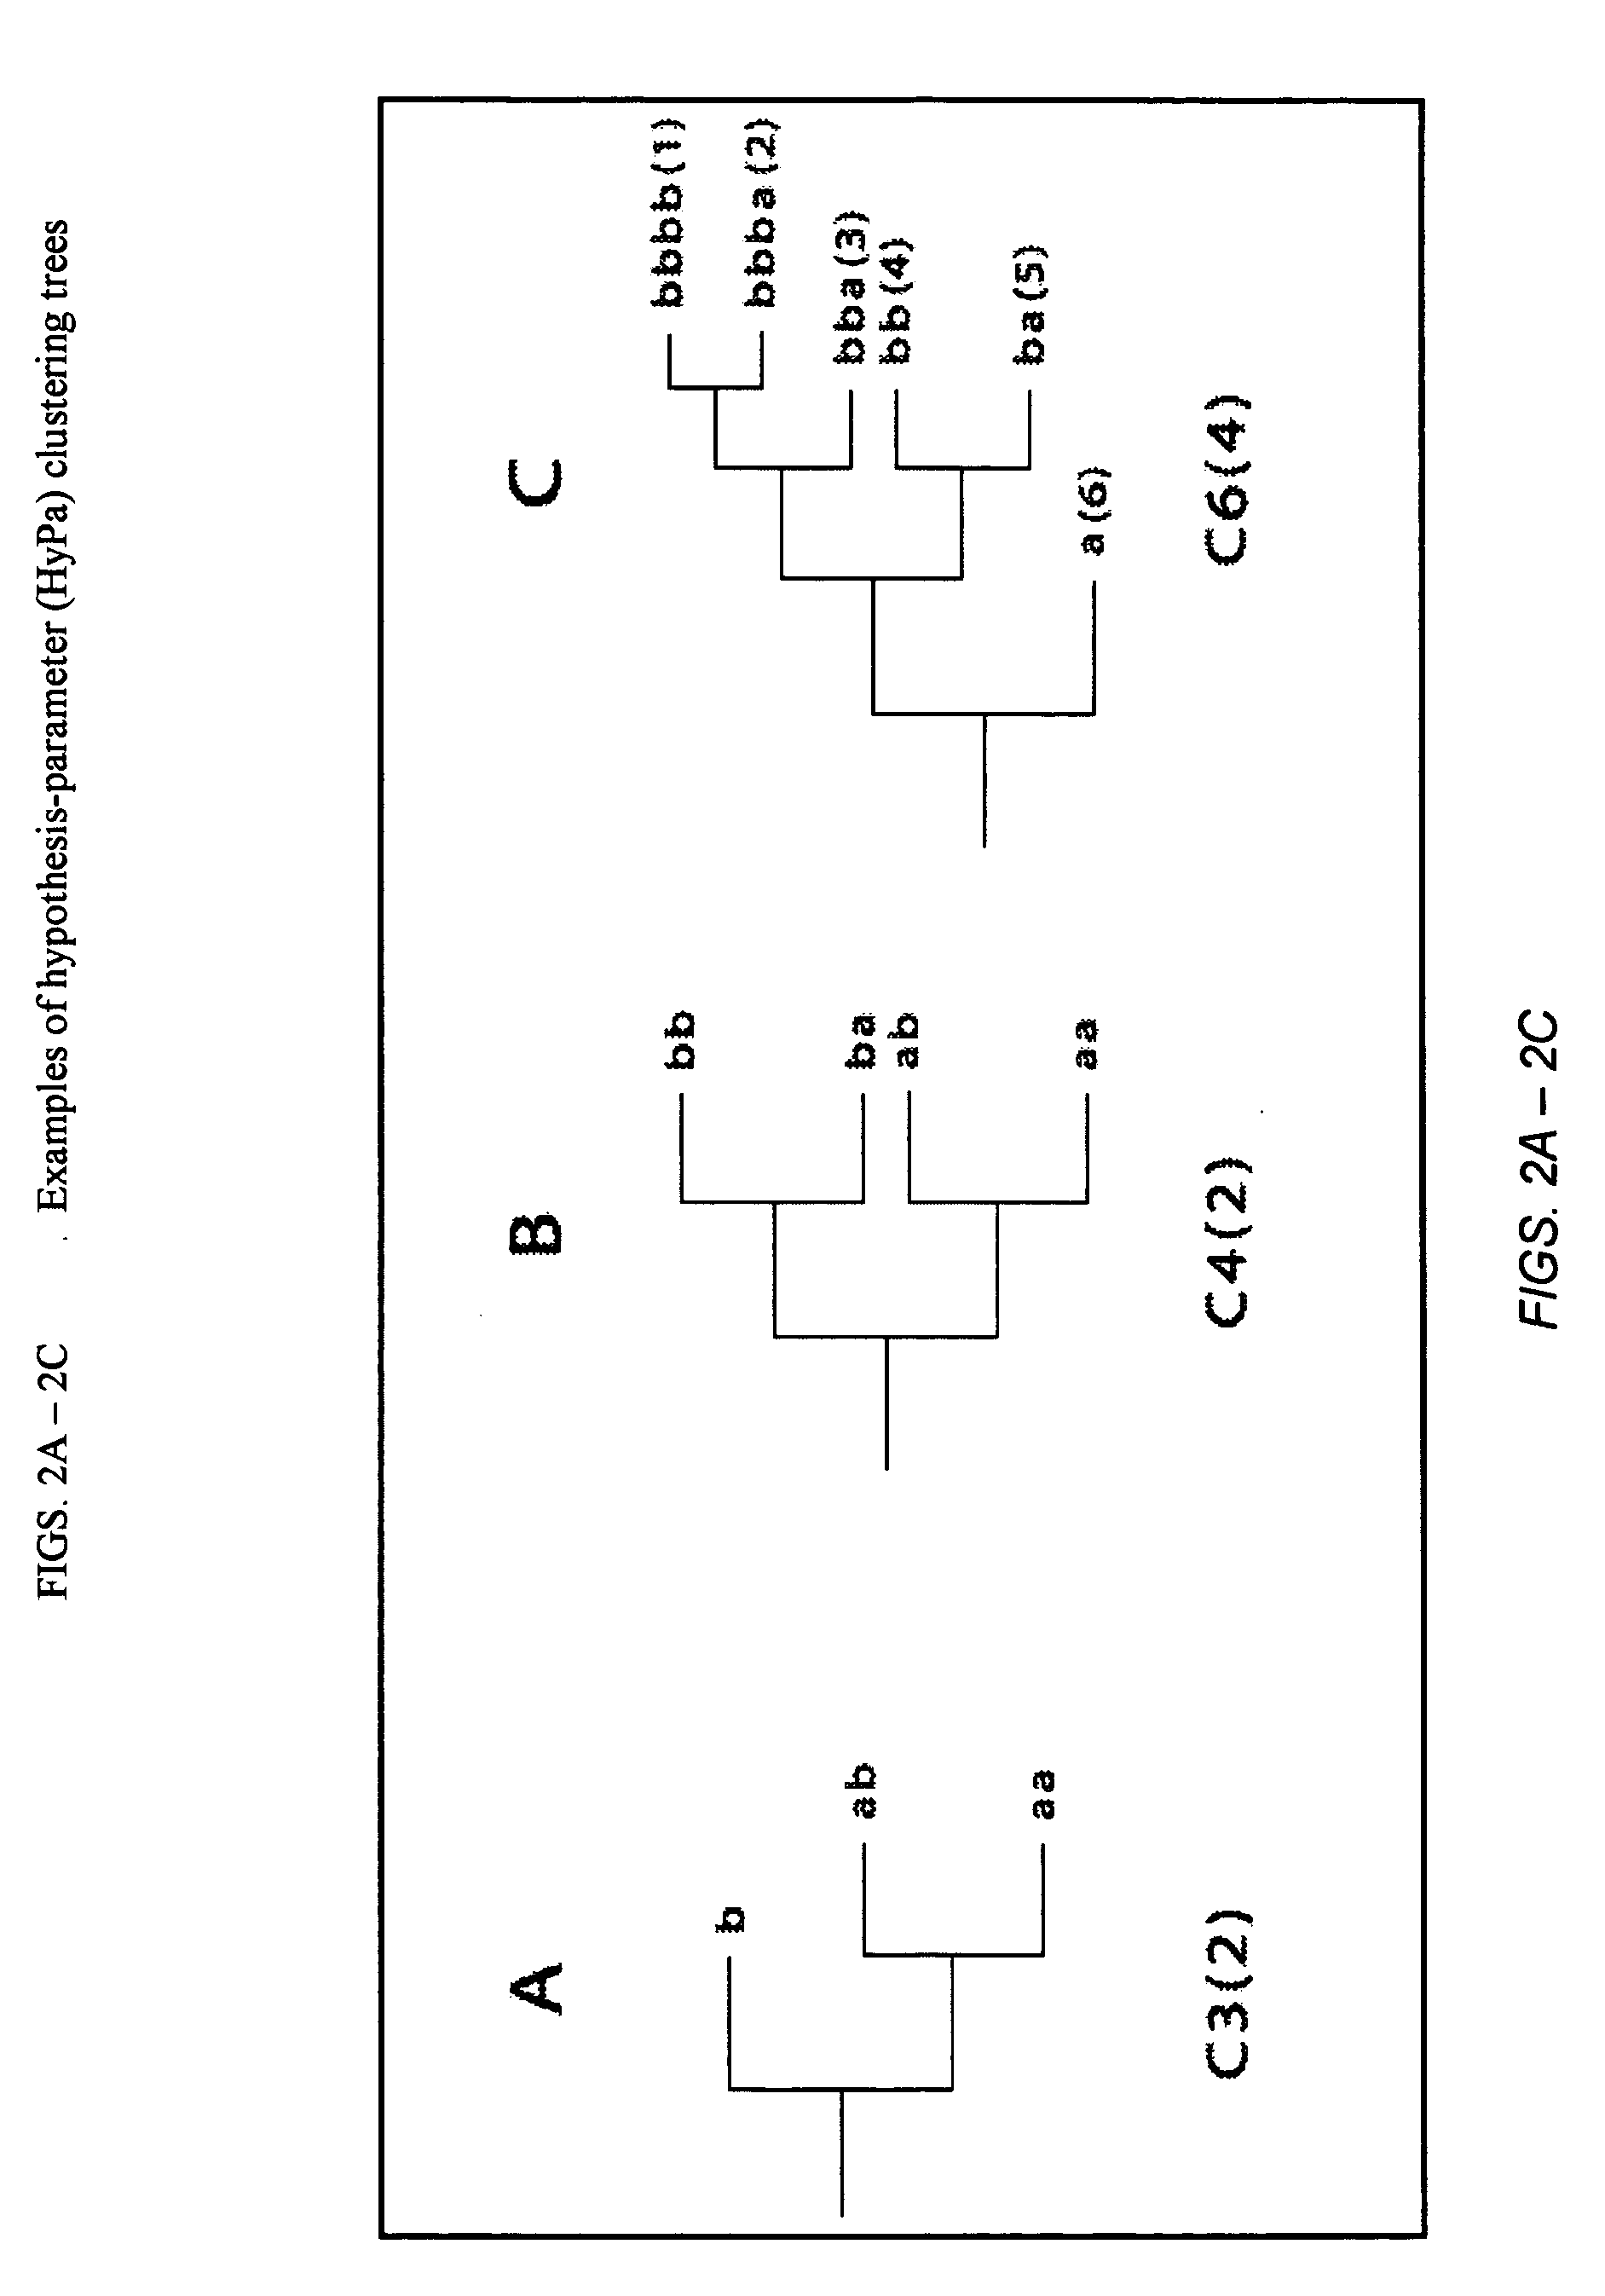 Method and computer-based sytem for non-probabilistic hypothesis generation and verification